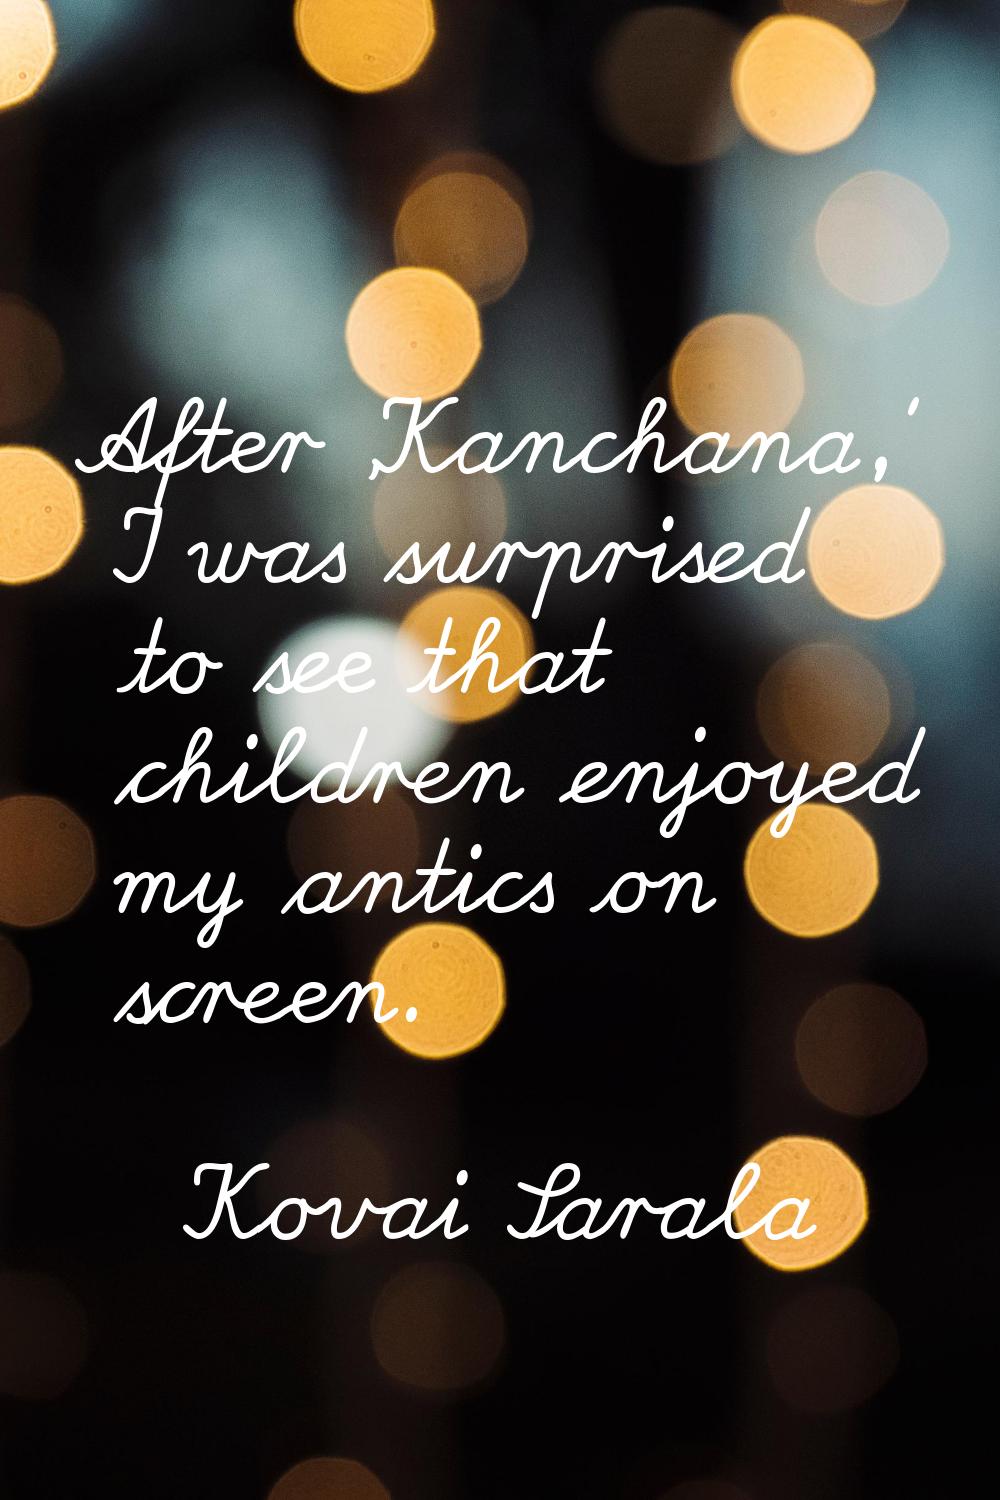 After 'Kanchana,' I was surprised to see that children enjoyed my antics on screen.